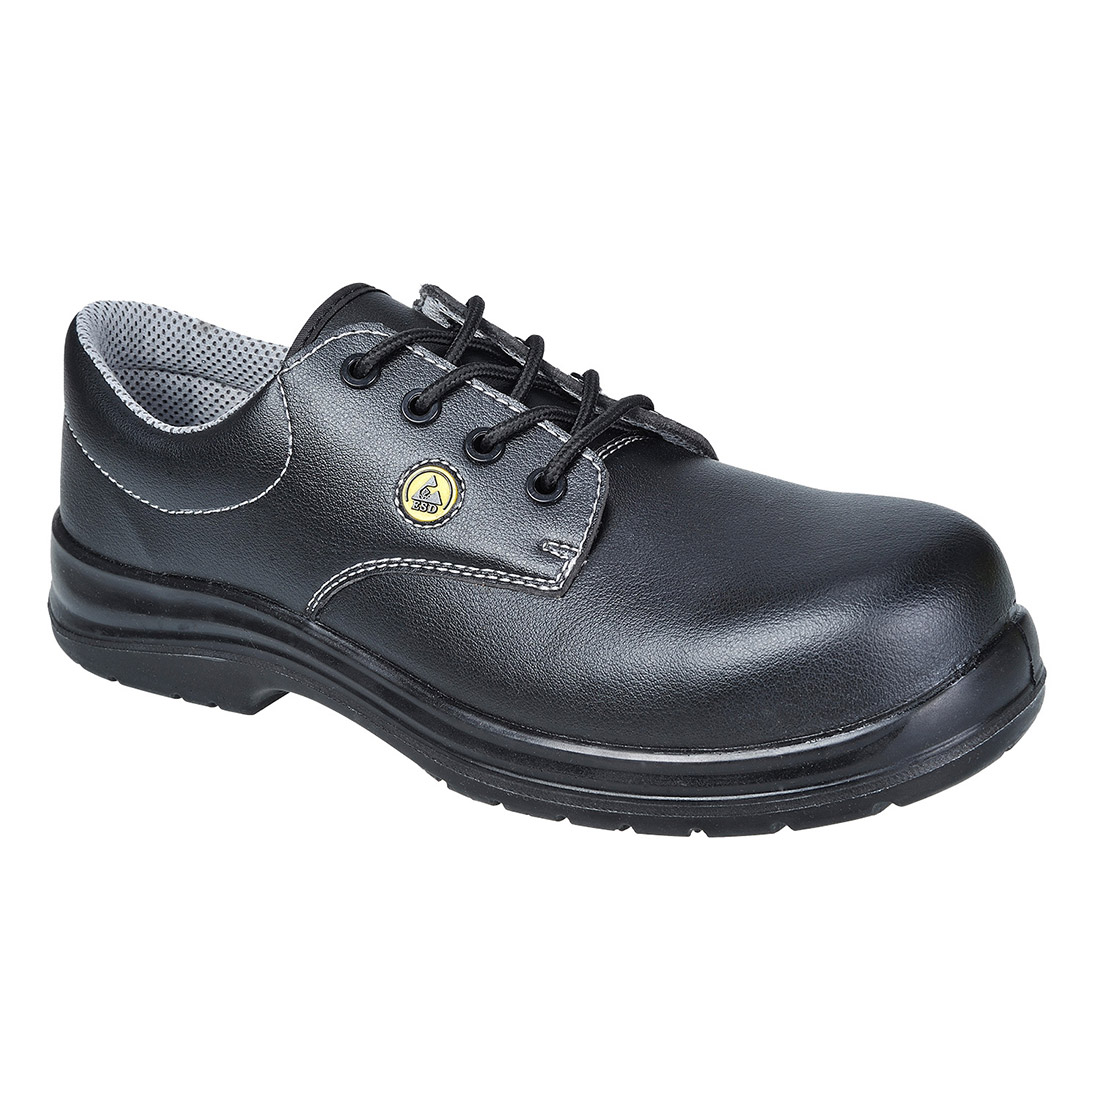 Compositelite ESD Laced Safety Shoe S2